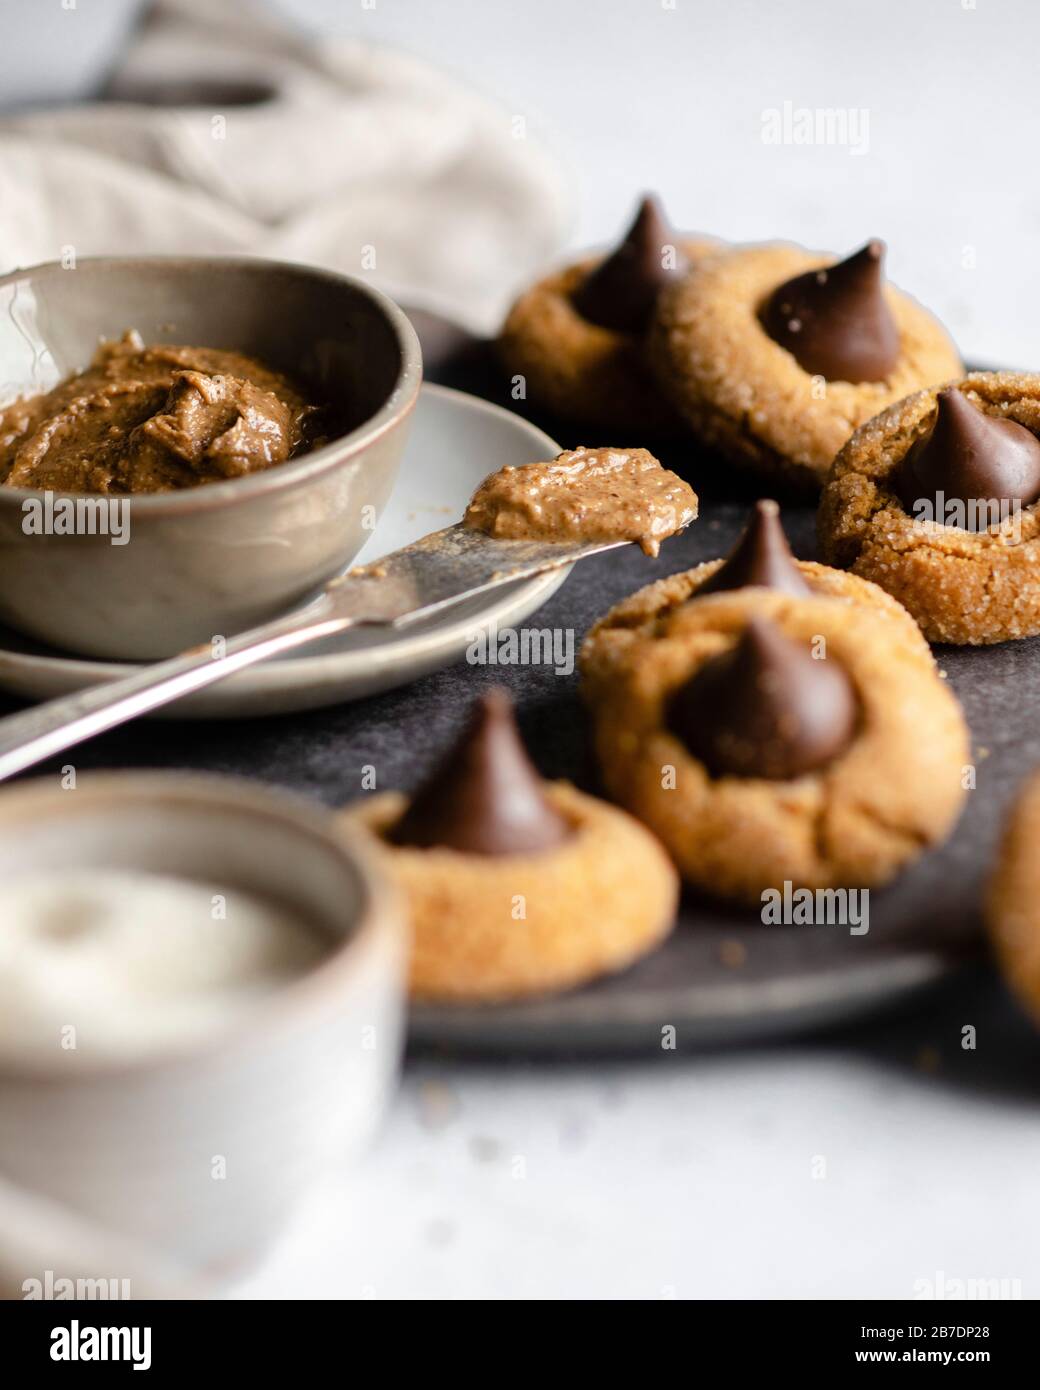 Peanut butter in a pinch bowl on a dark grey plate surrounded by chocolate kisses cookies Stock Photo